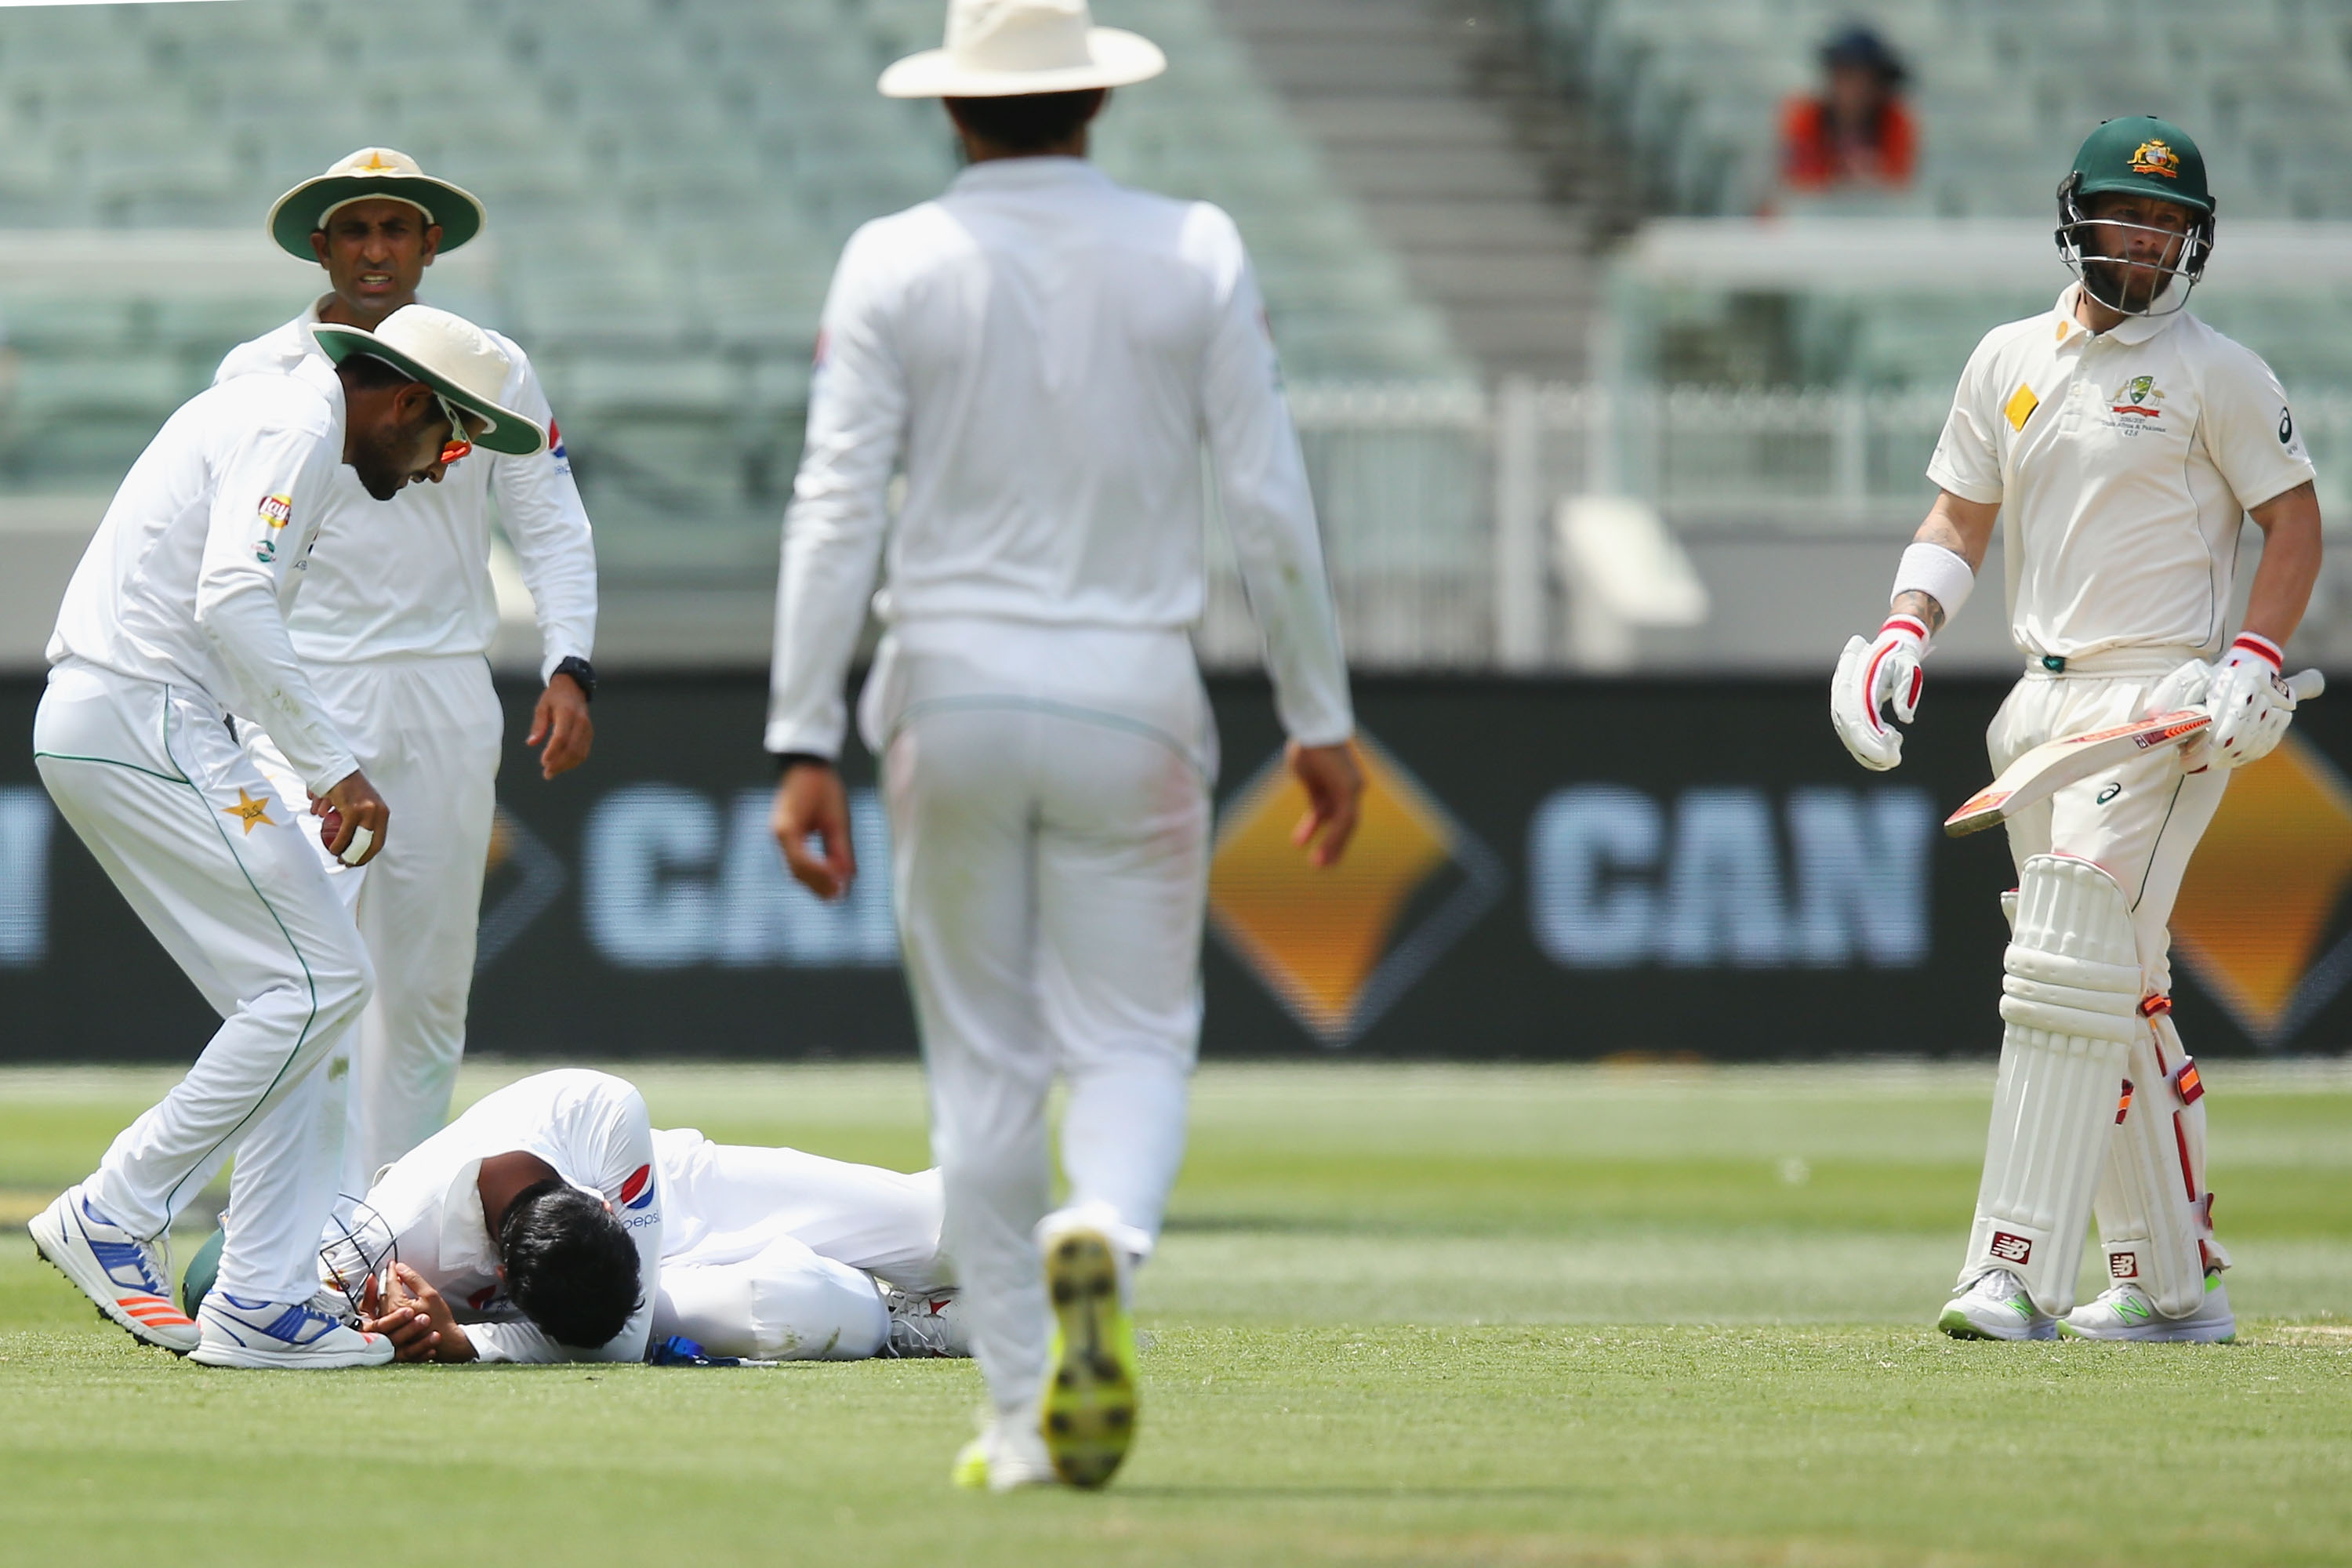 Five of the most severe on-field injuries in cricket